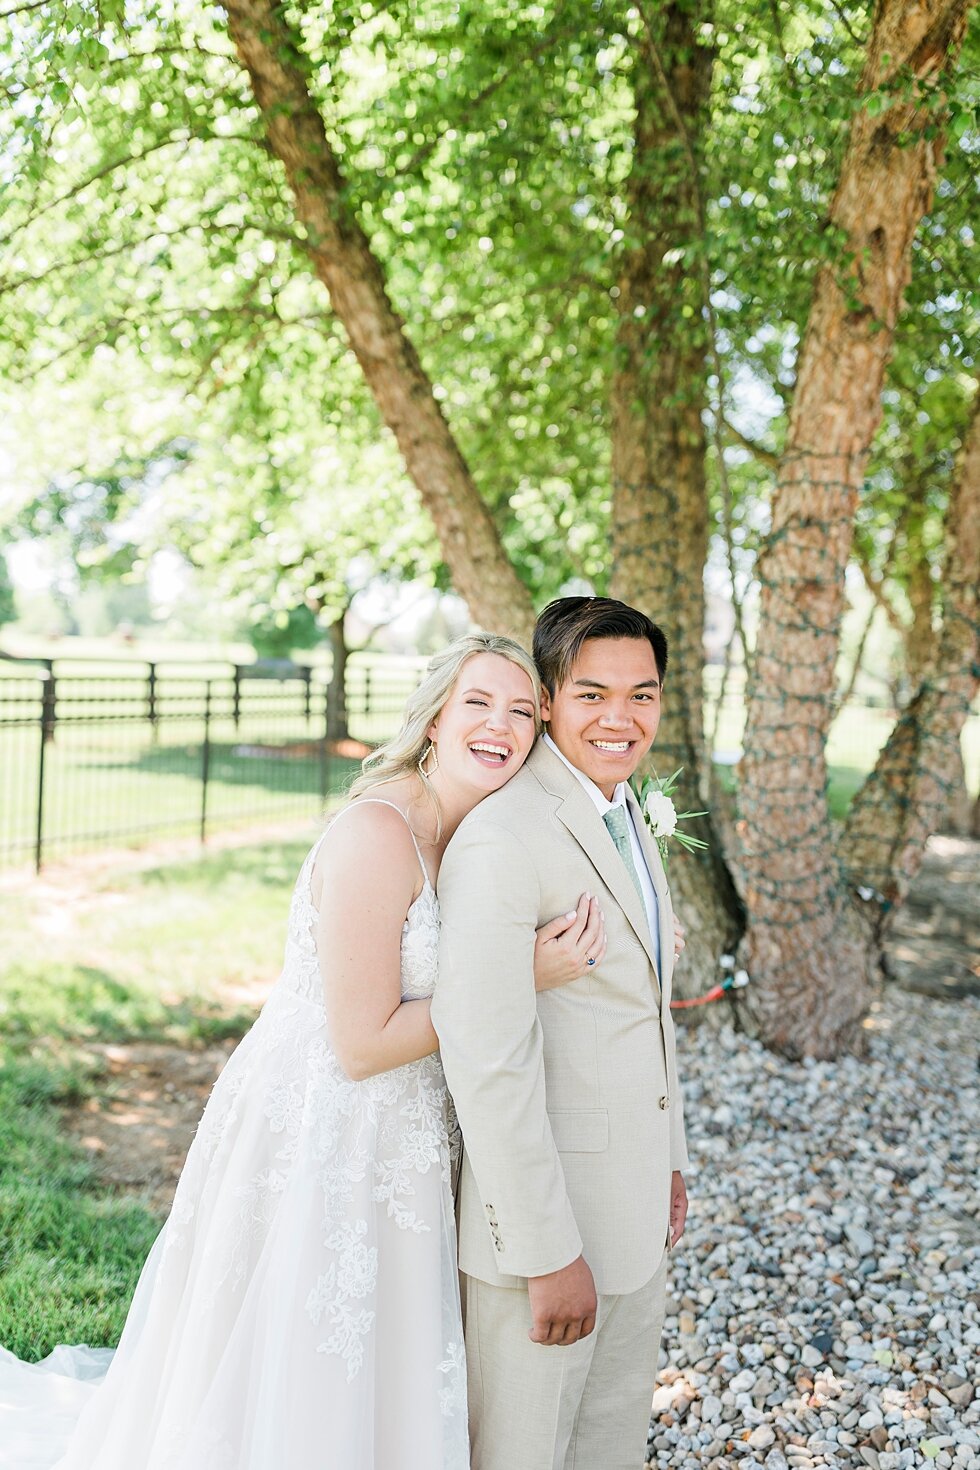  Such a wonderful couple taking portraits after they tied the knot during their romantic and intimate backyard wedding! Romantic casual lace wedding gown close friends neutral colors background wedding natural greenery crisp white #midwestphotographe